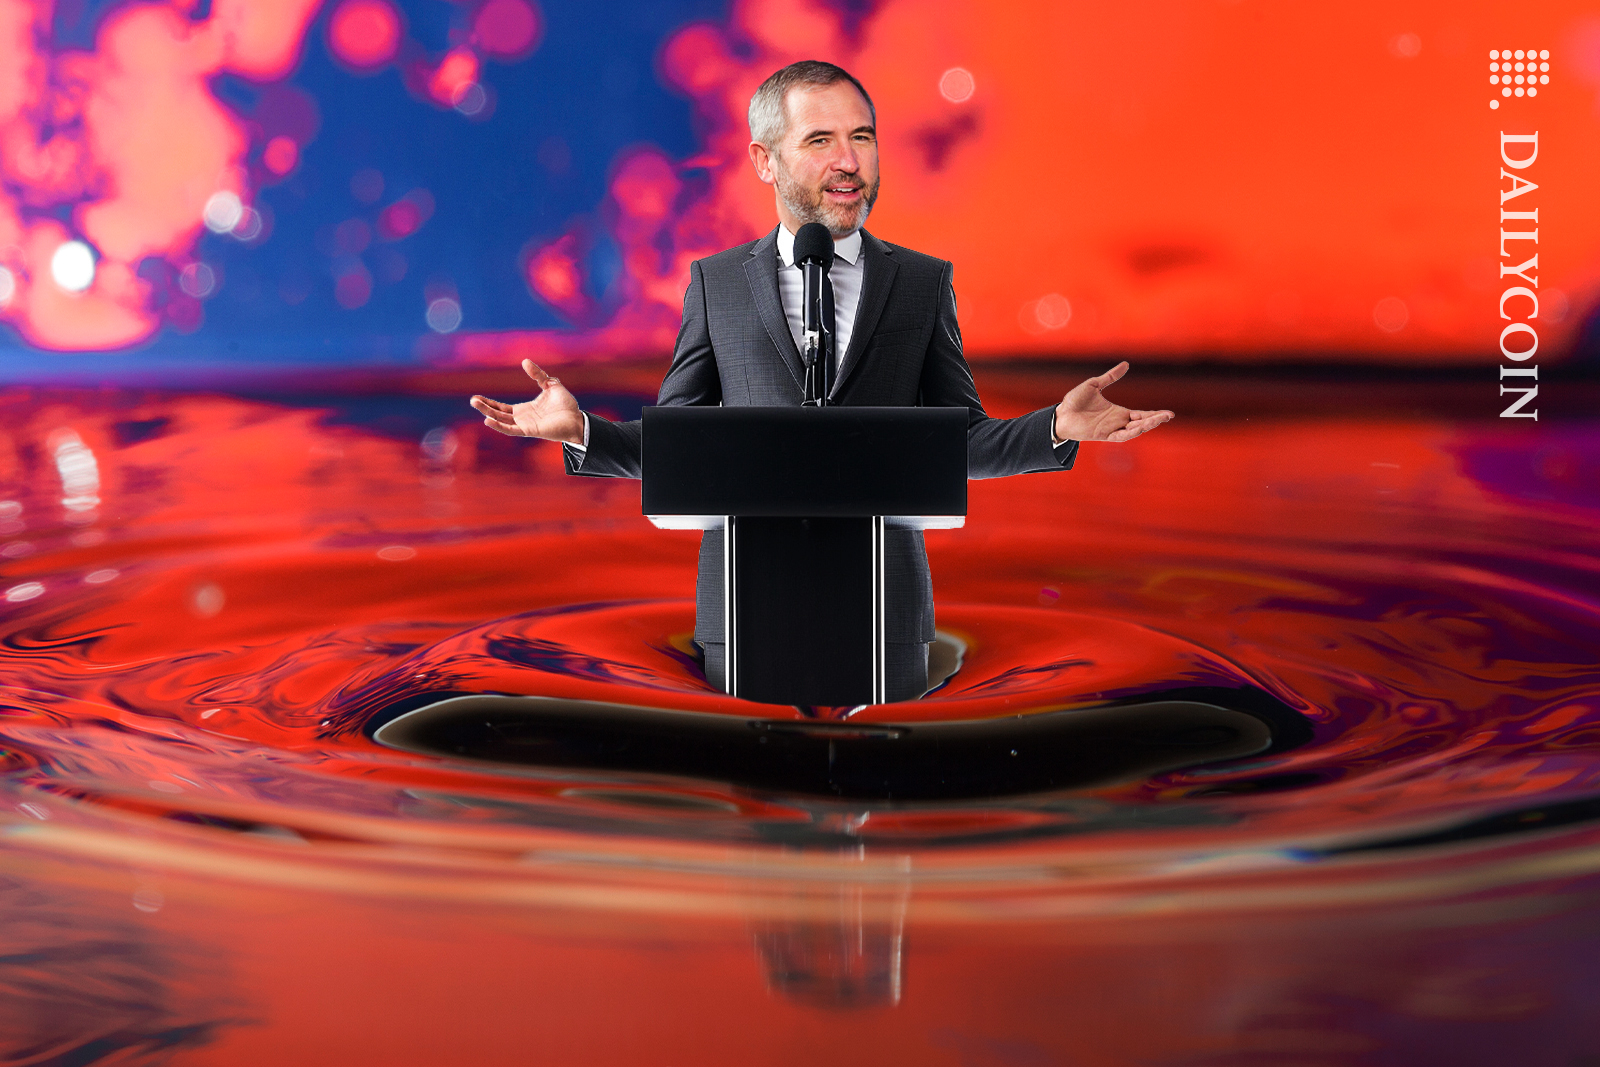 Brad Garlinghouse coming out of water making a speech.